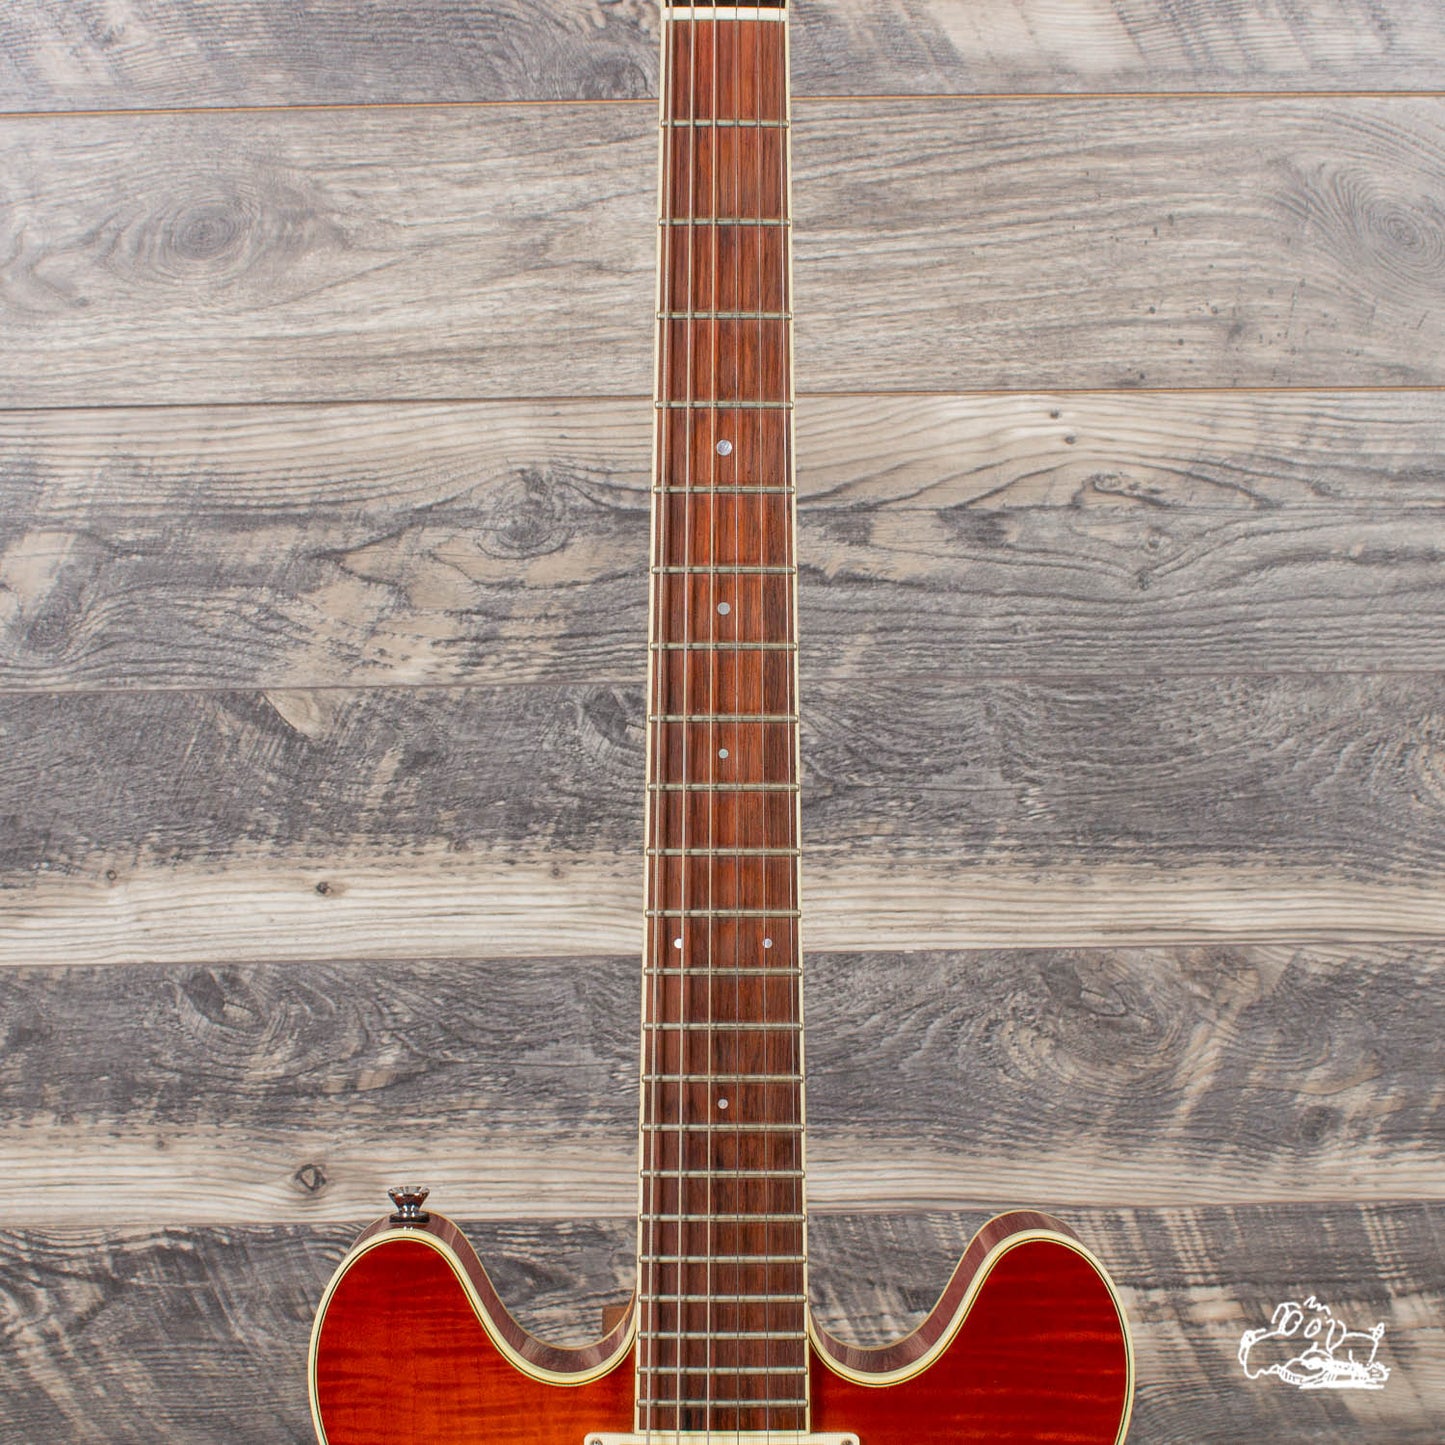 2007 Collings I-35 Deluxe